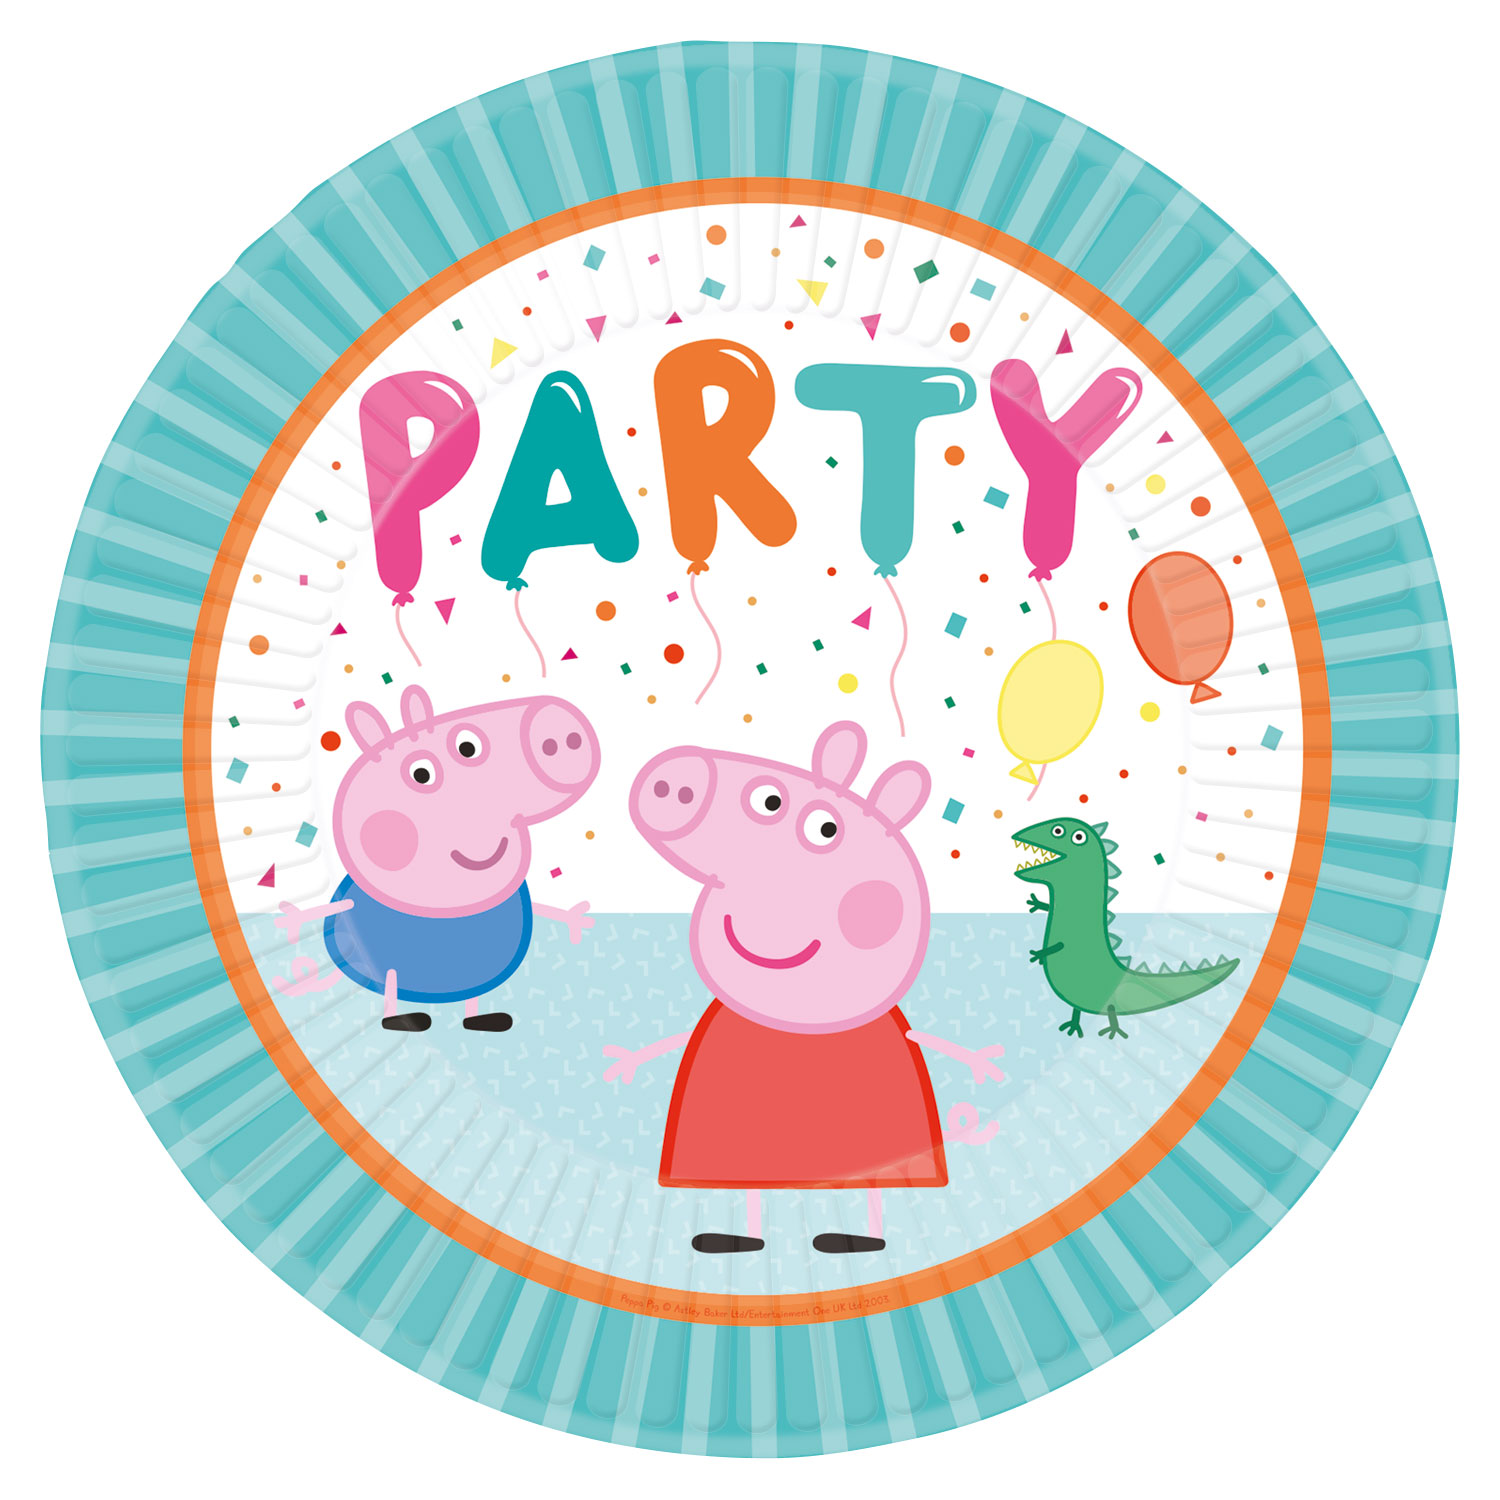 Peppa Pig Party In A Box - 8 Guests